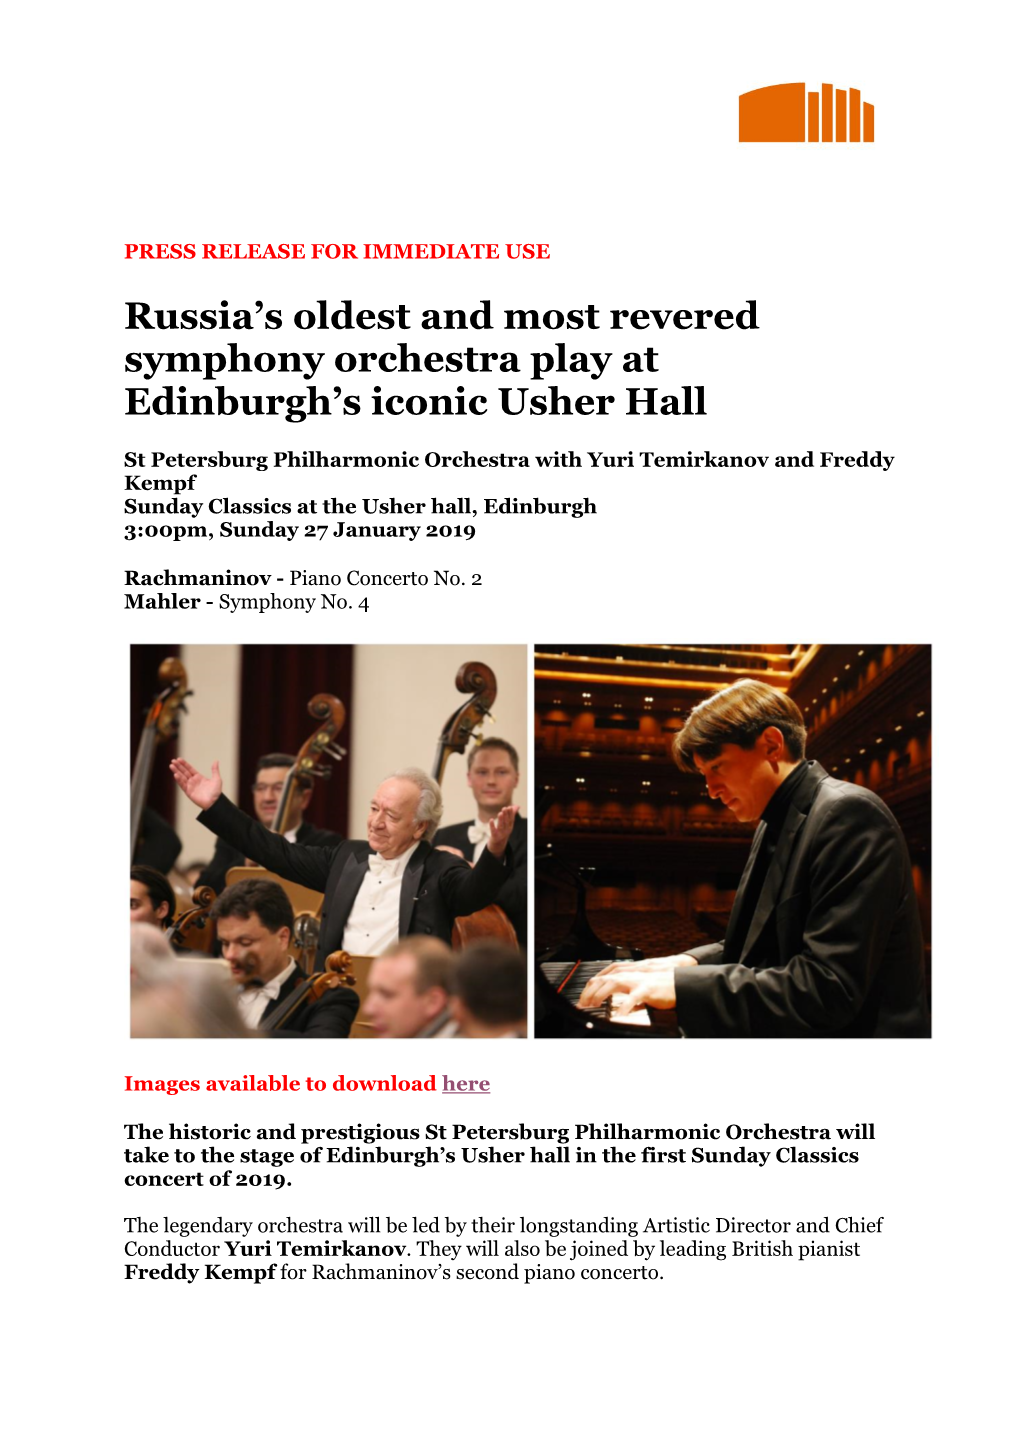 Russia's Oldest and Most Revered Symphony Orchestra Play At